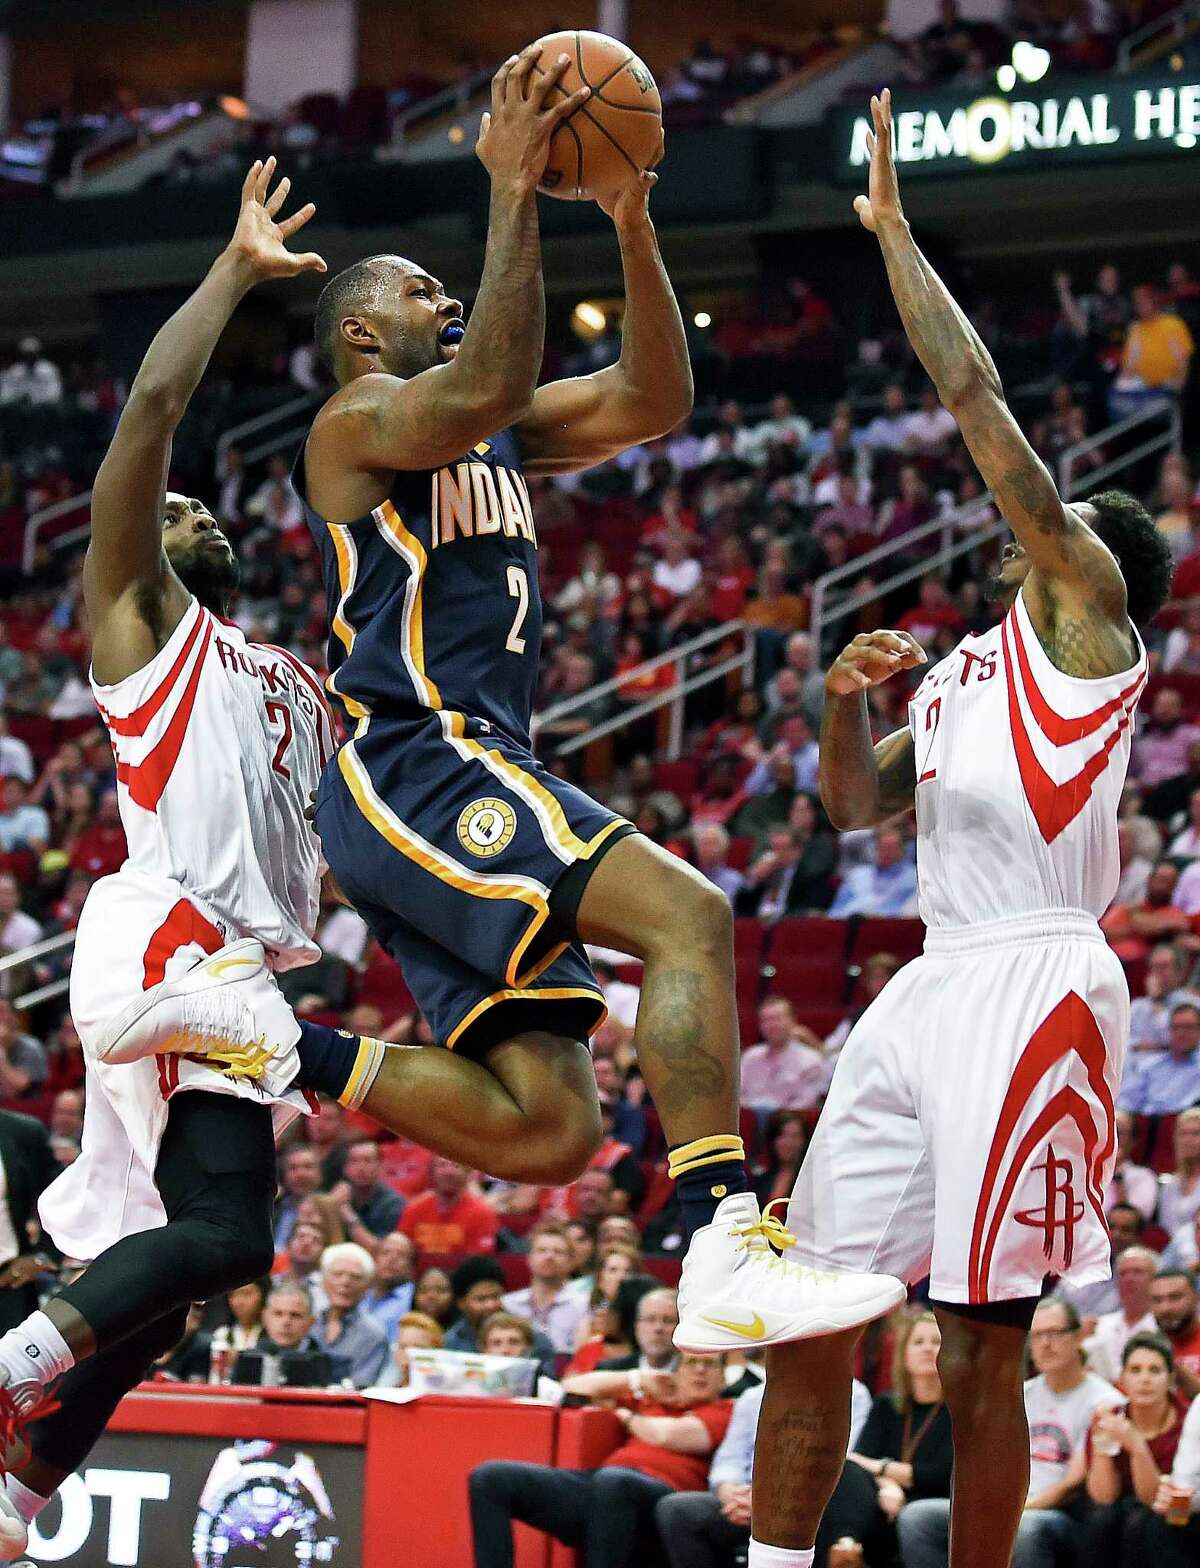 Indiana Pacers guard Rodney Stuckey, center, drives to the basket as Houston Rockets guard Patrick Beverley, left, and guard Louis Williams defend in the first half of an NBA basketball game, Monday, Feb. 27, 2017, in Houston. (AP Photo/Eric Christian Smith)